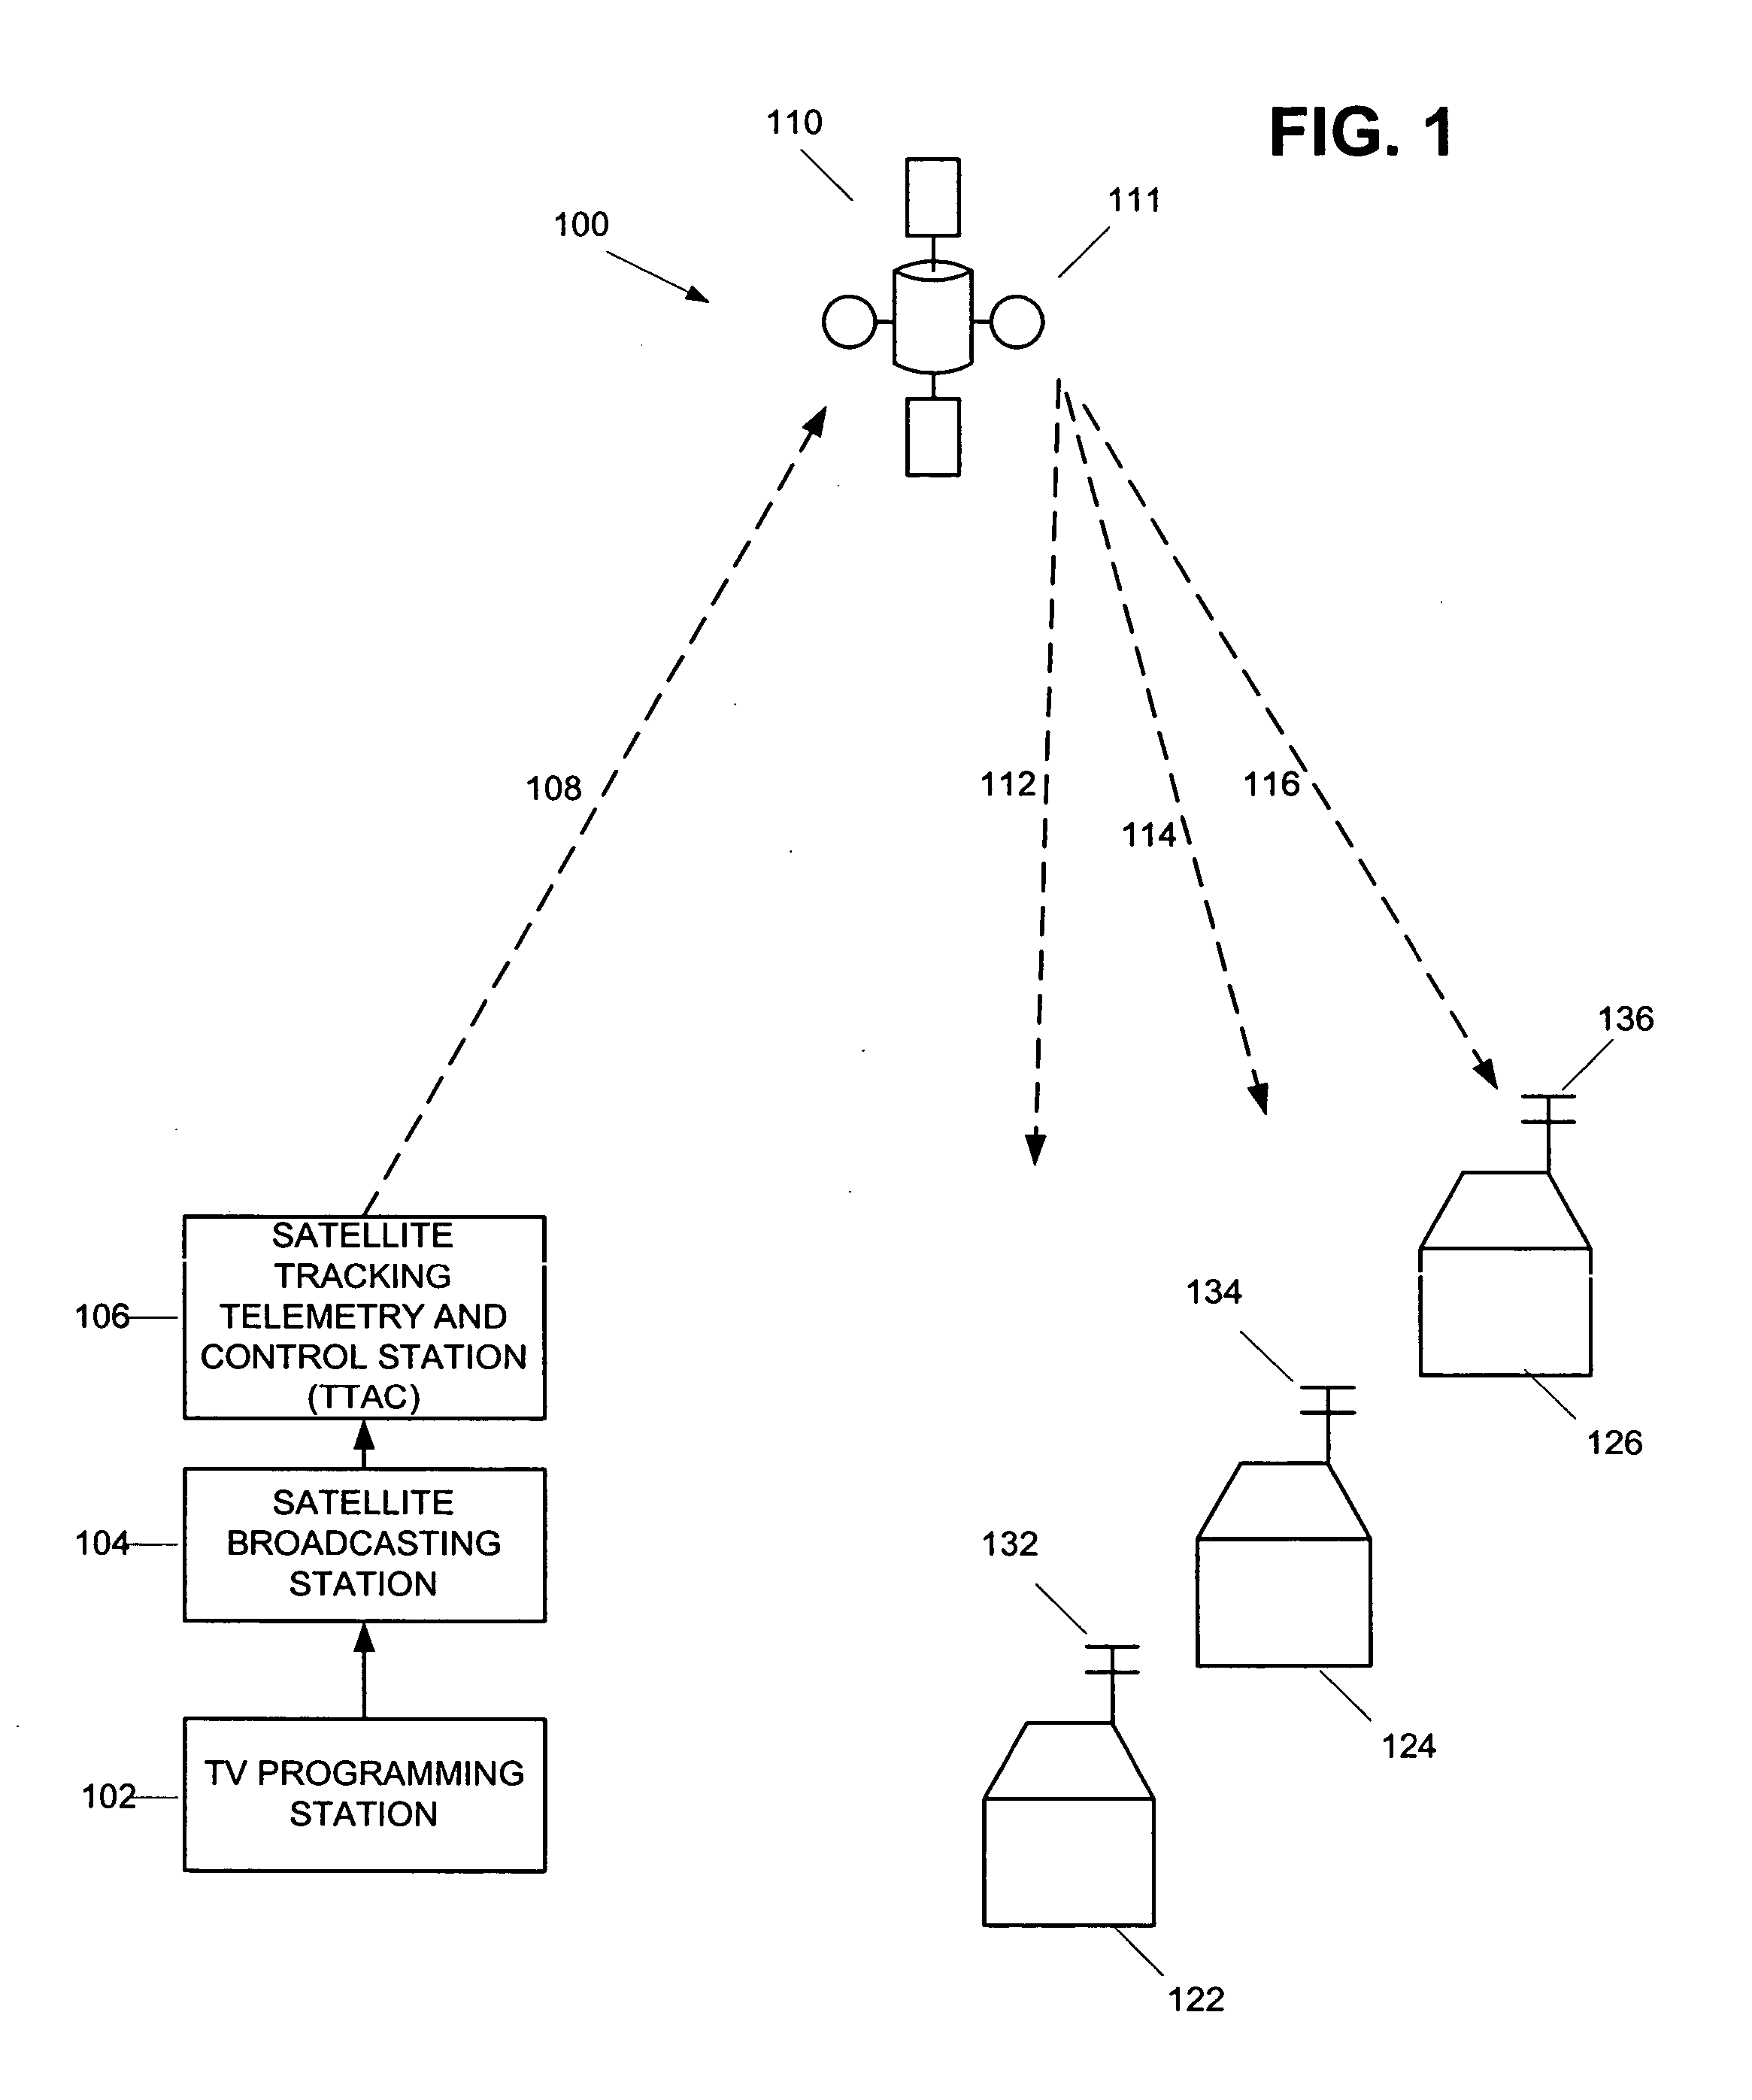 Method of using feedback from consumer terminals to adaptively control a satellite system